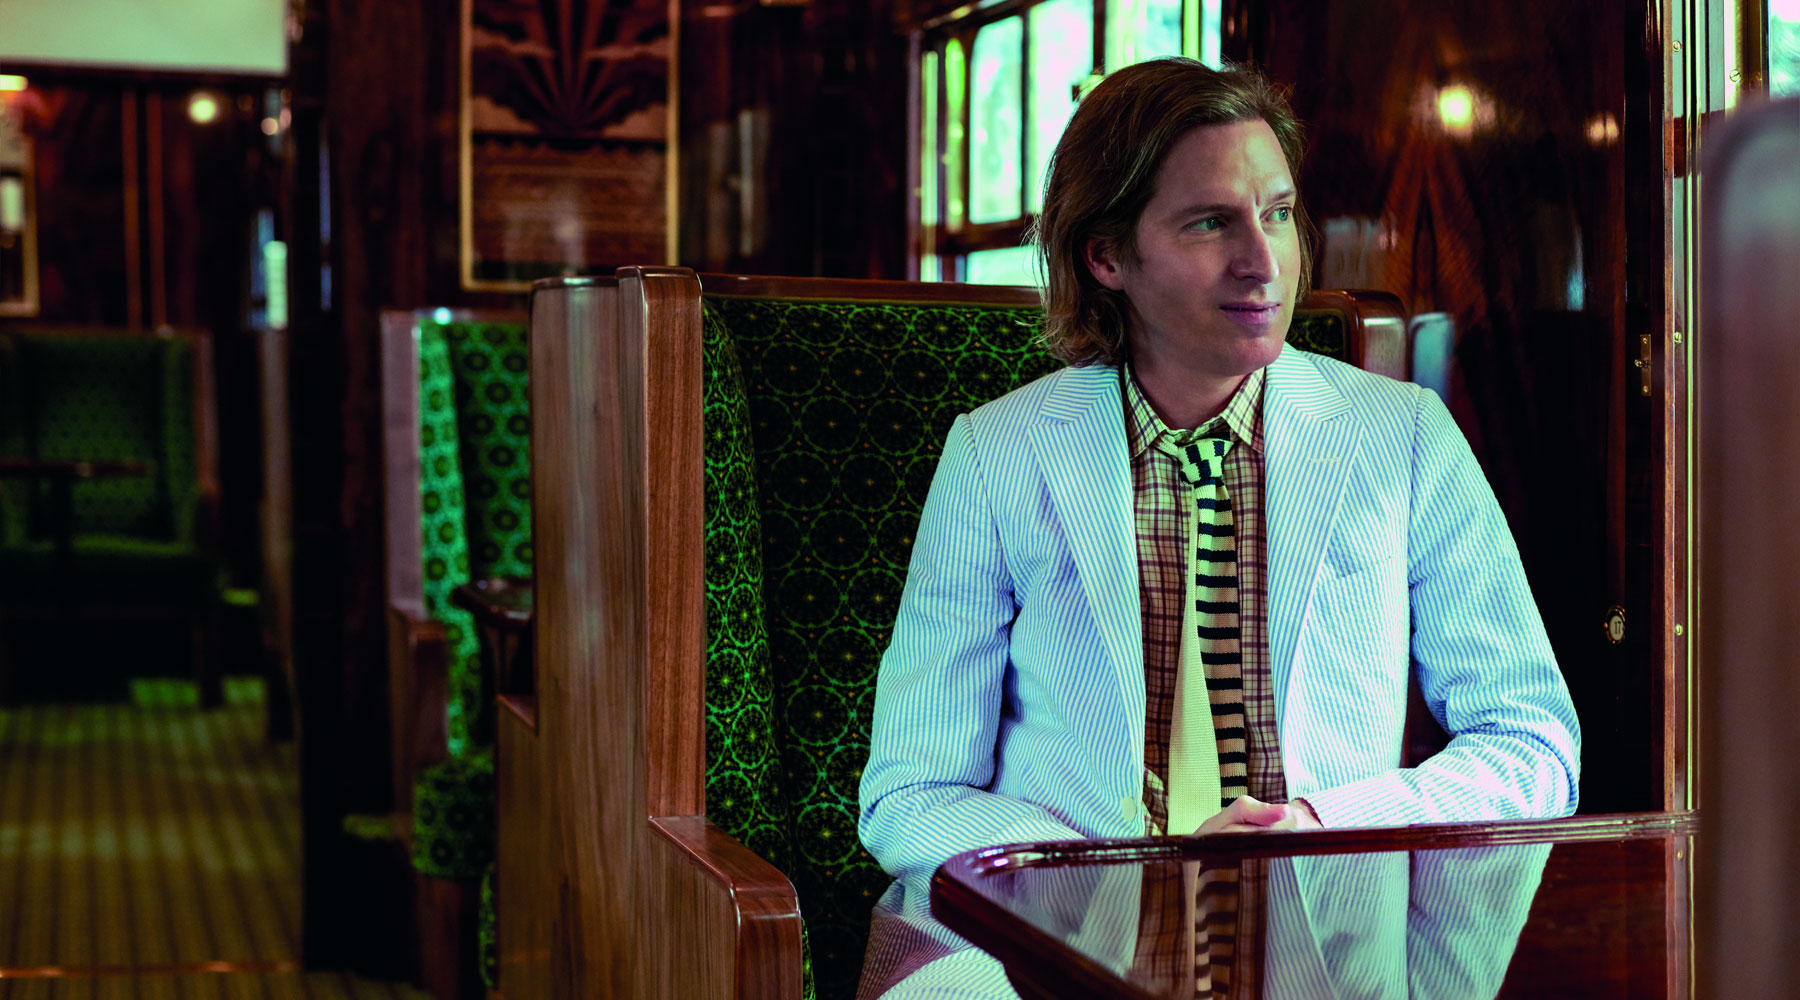 Take a trip in a Wes Anderson designed steam train